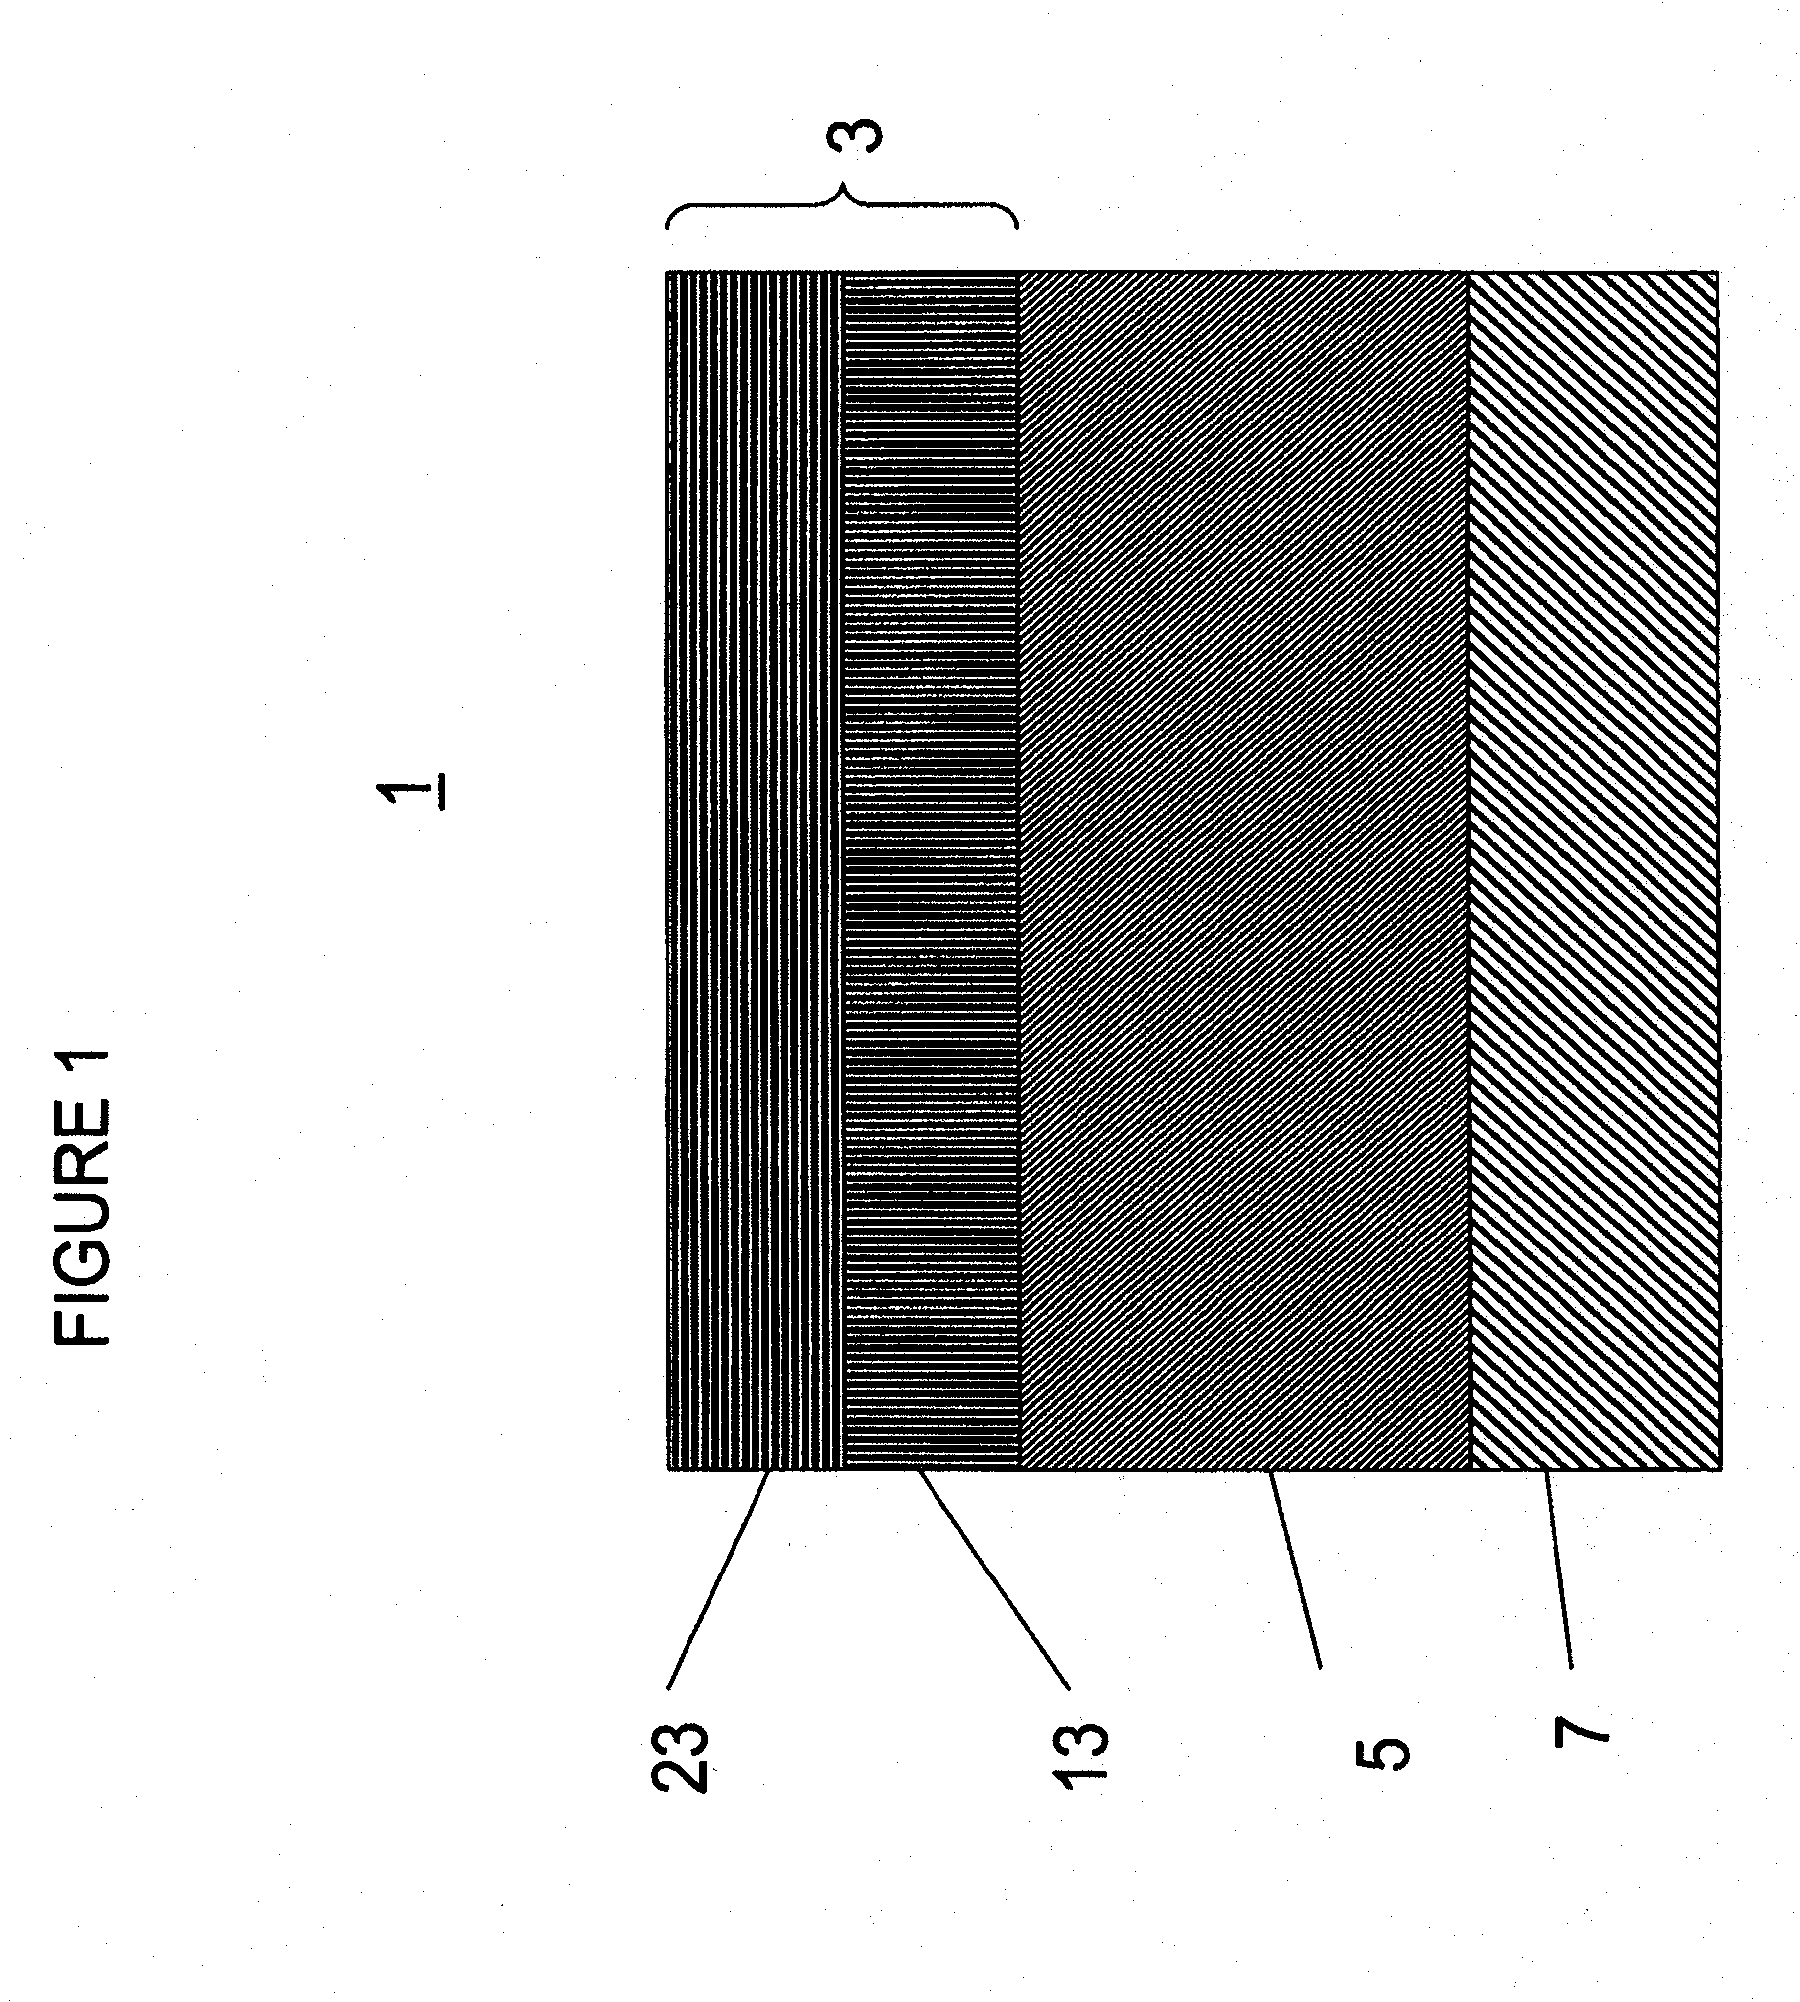 Internal reforming anode for solid oxide fuel cells